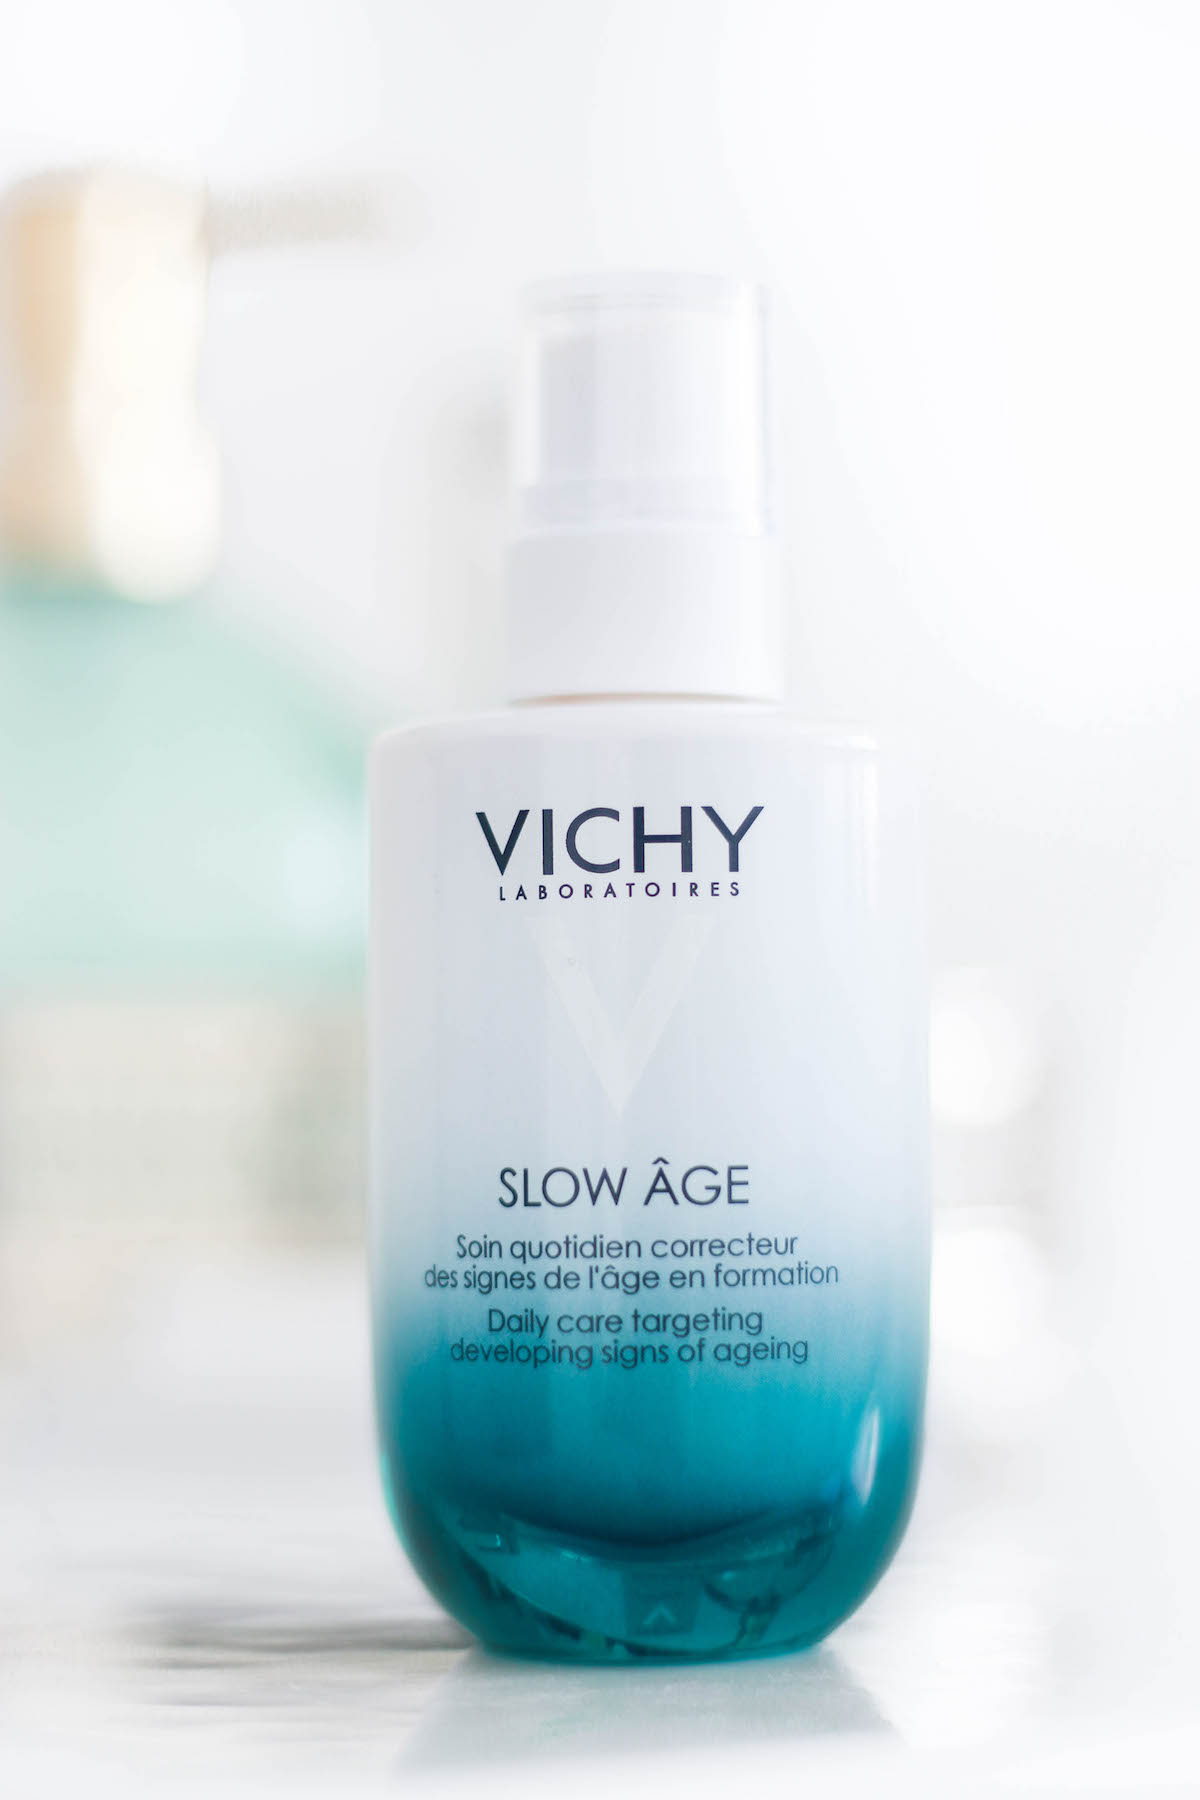 slow-age-vichy-neues-produkt-review-beauty-blog-sara-bow